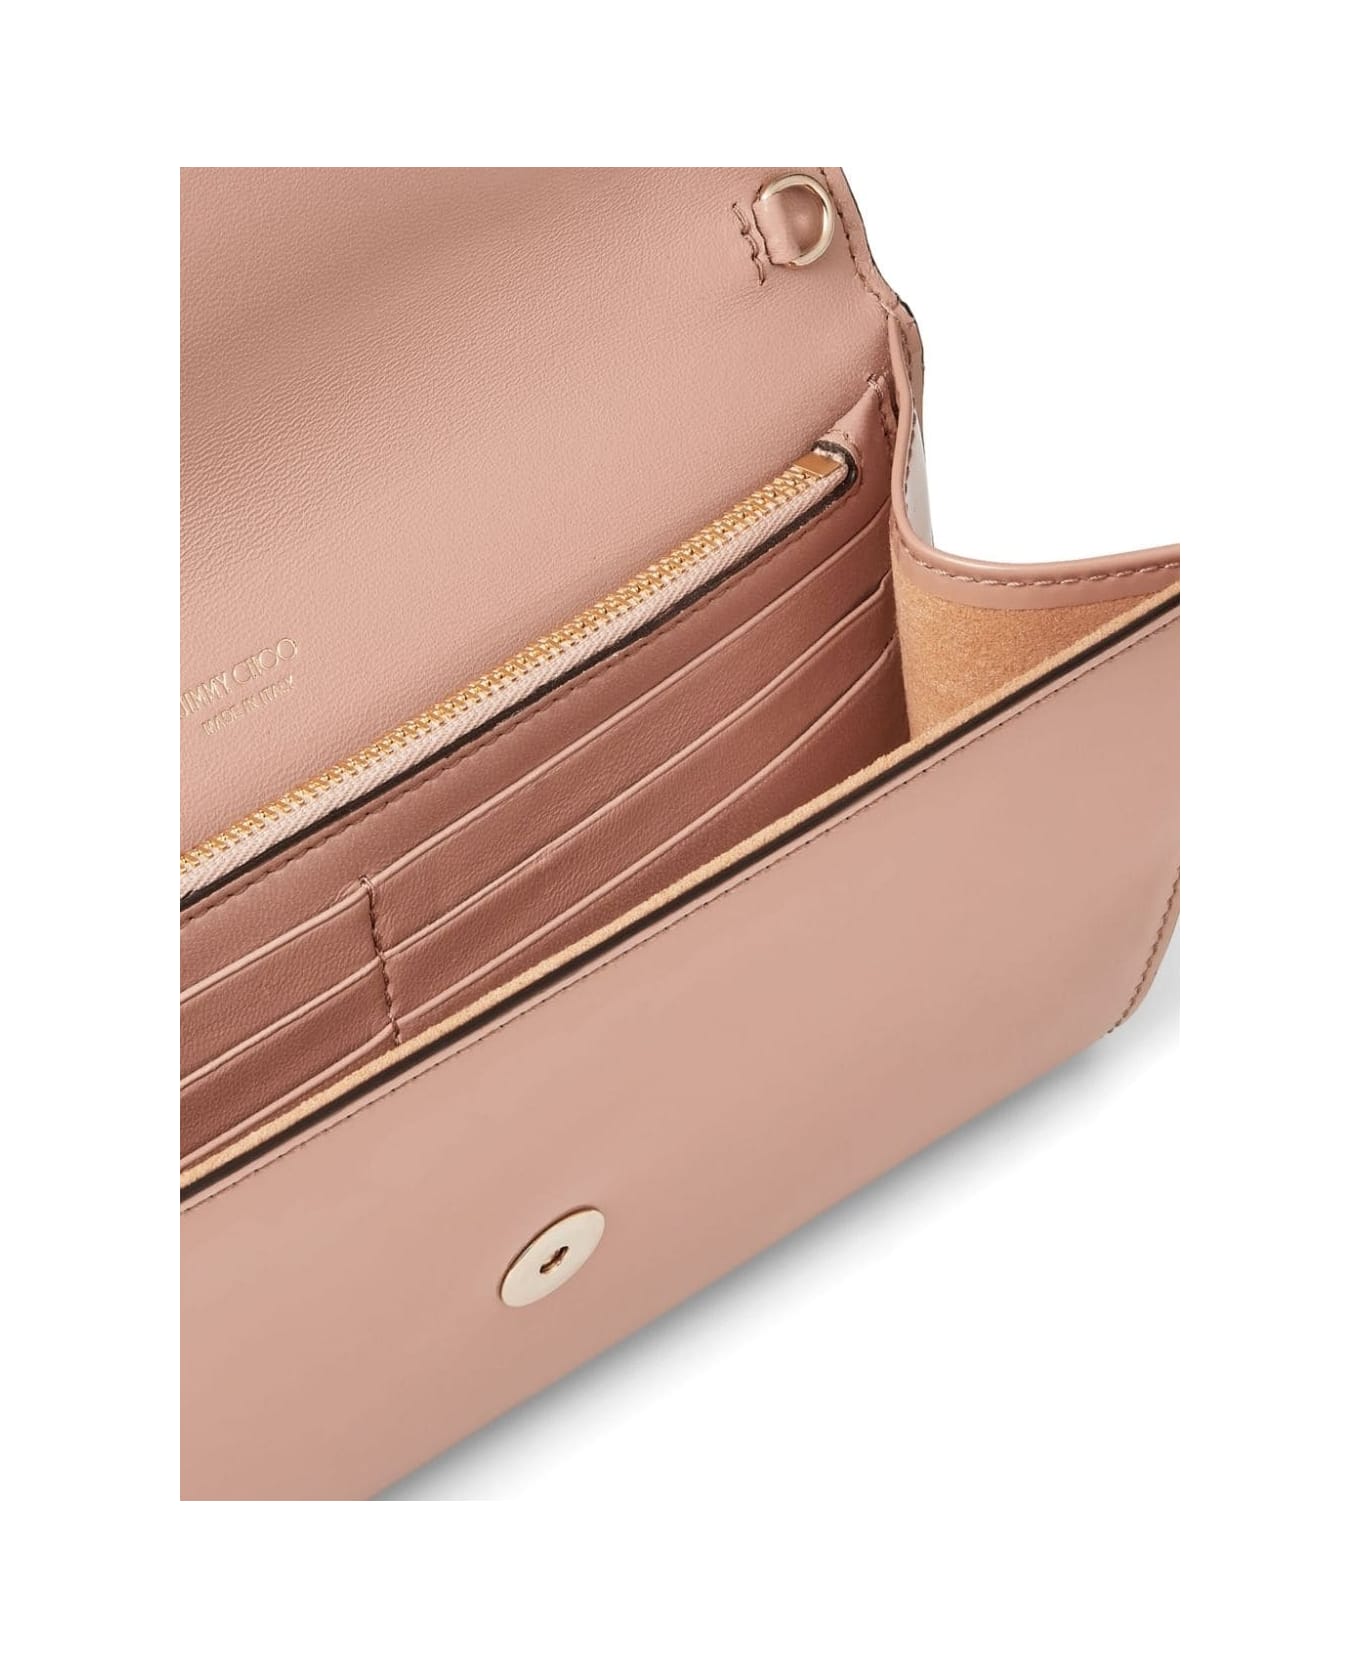 Jimmy Choo Emmie Clutch Bag In Ballet Pink Patent Leather - Pink